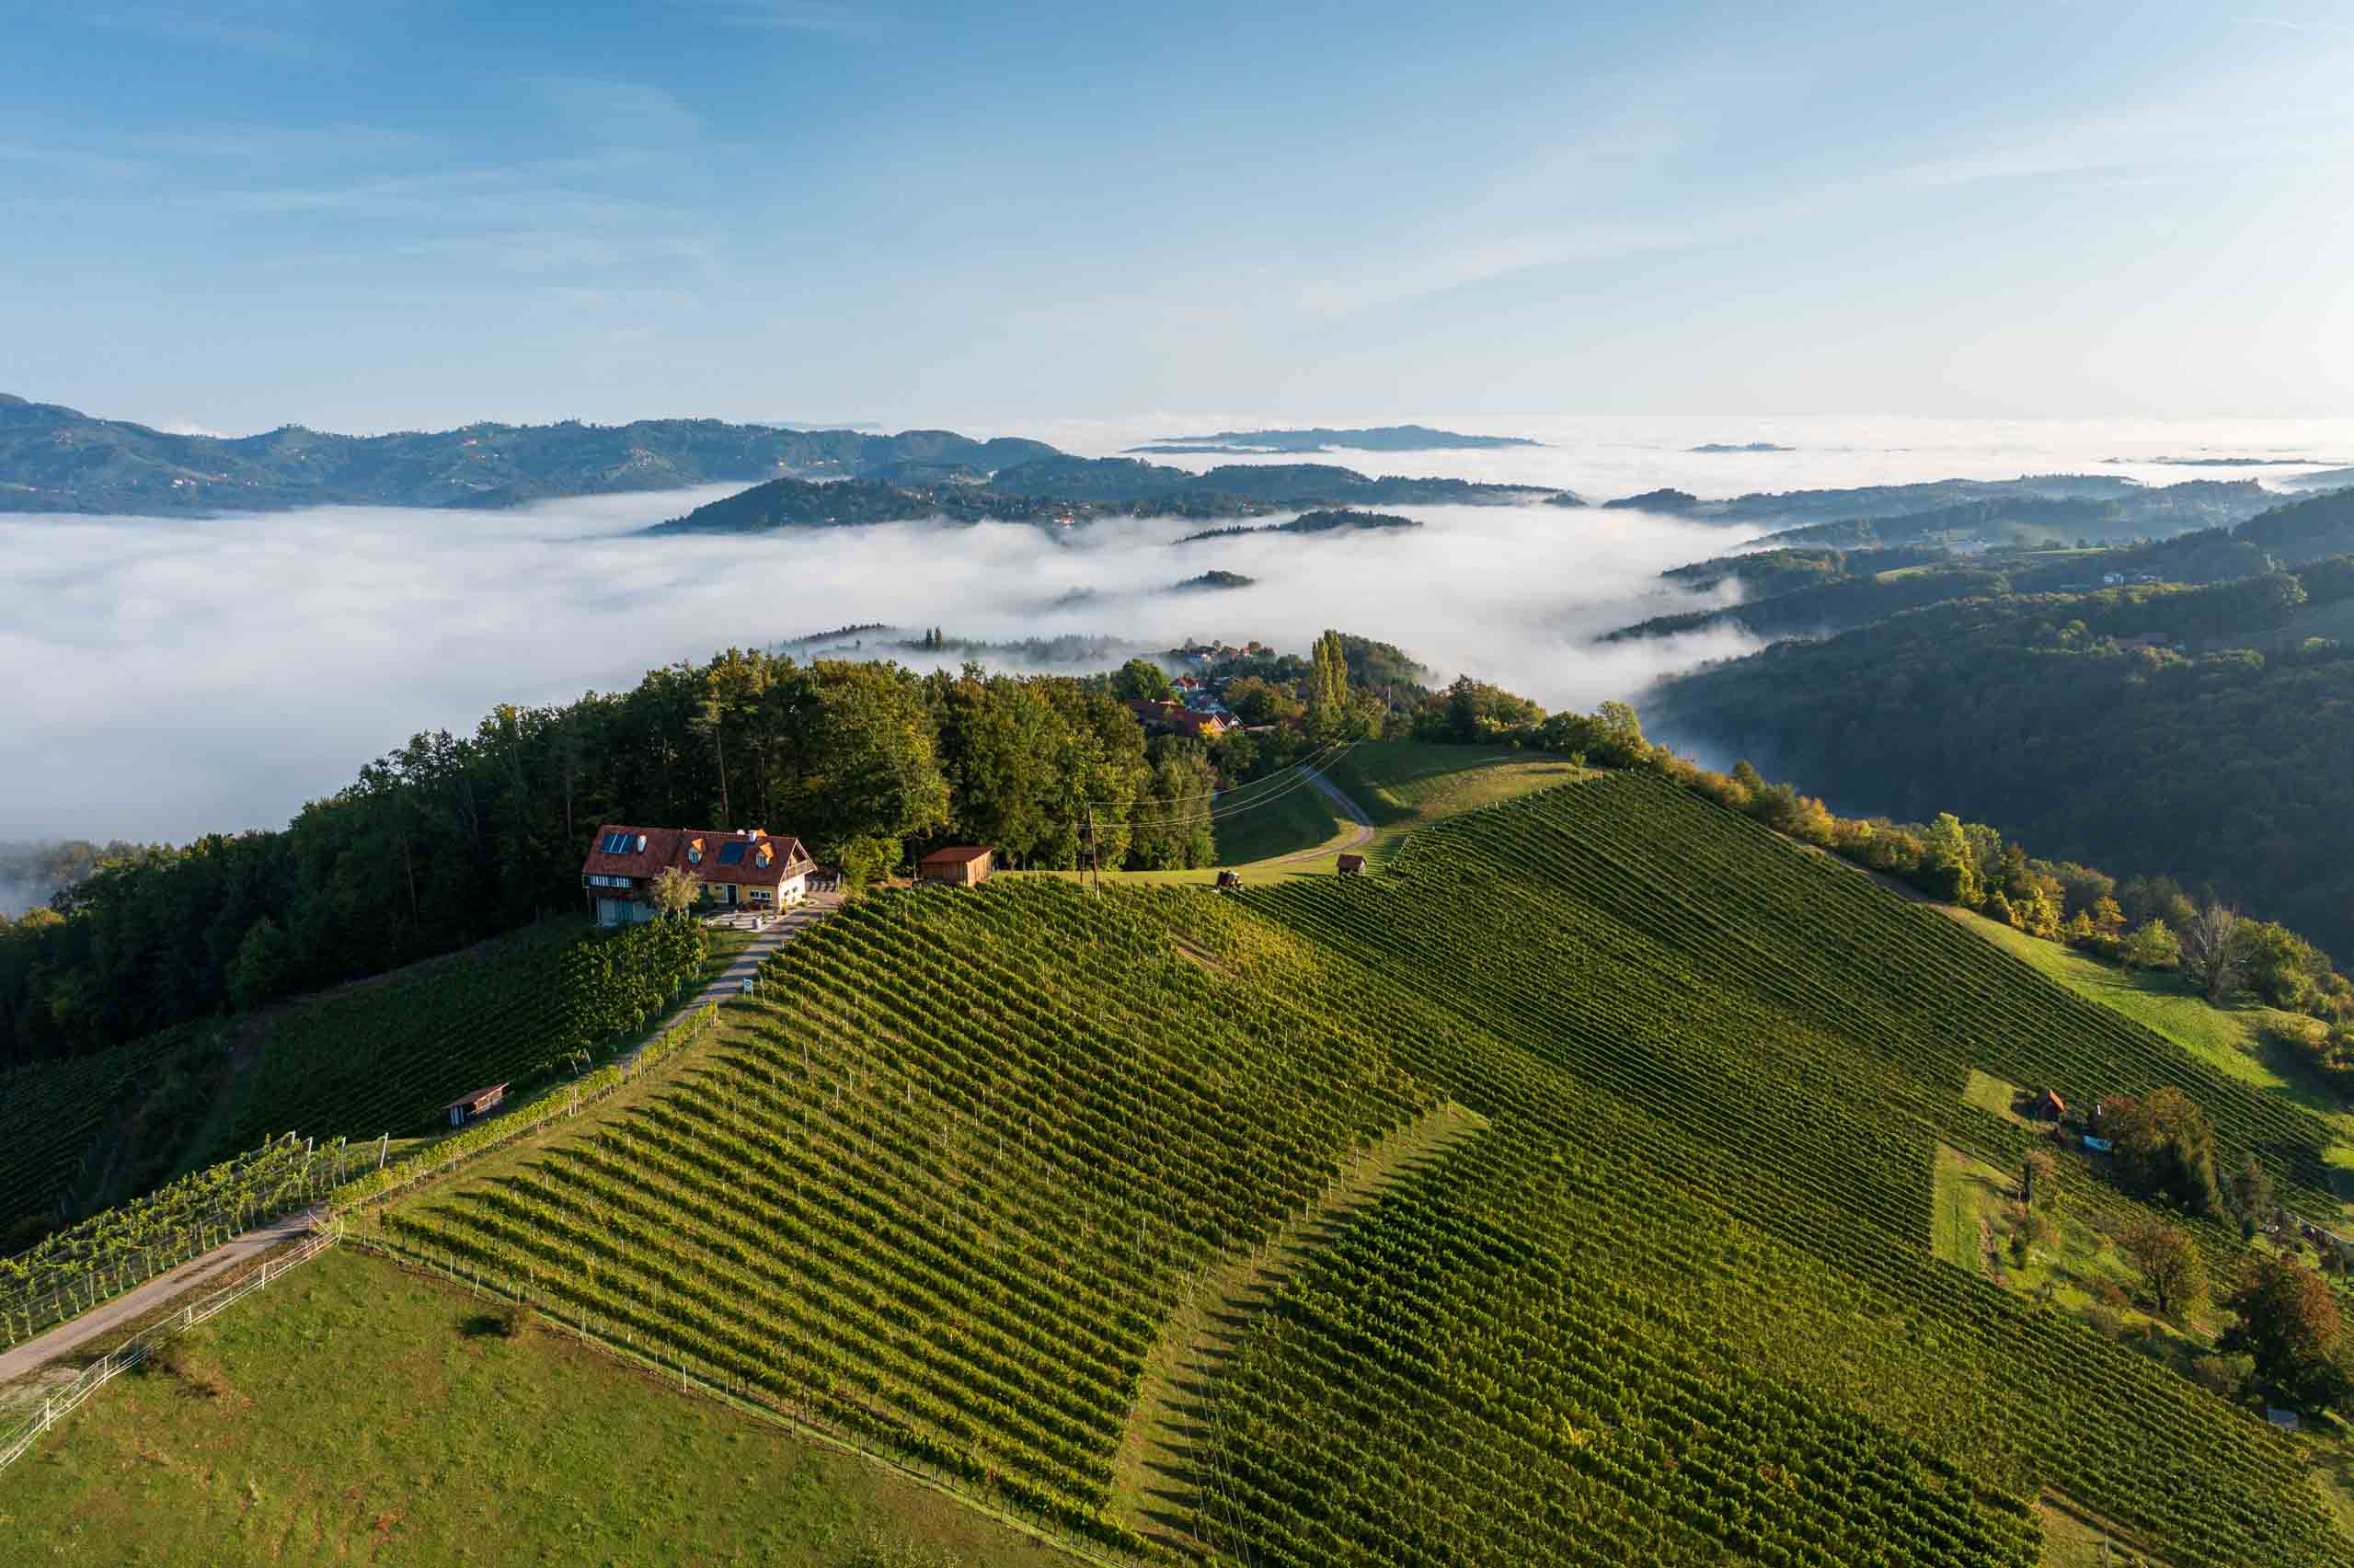 A picure of a landscape in Steiermark. There are vines and houses on hills. A low layer of clouds is covering parts of the hills.